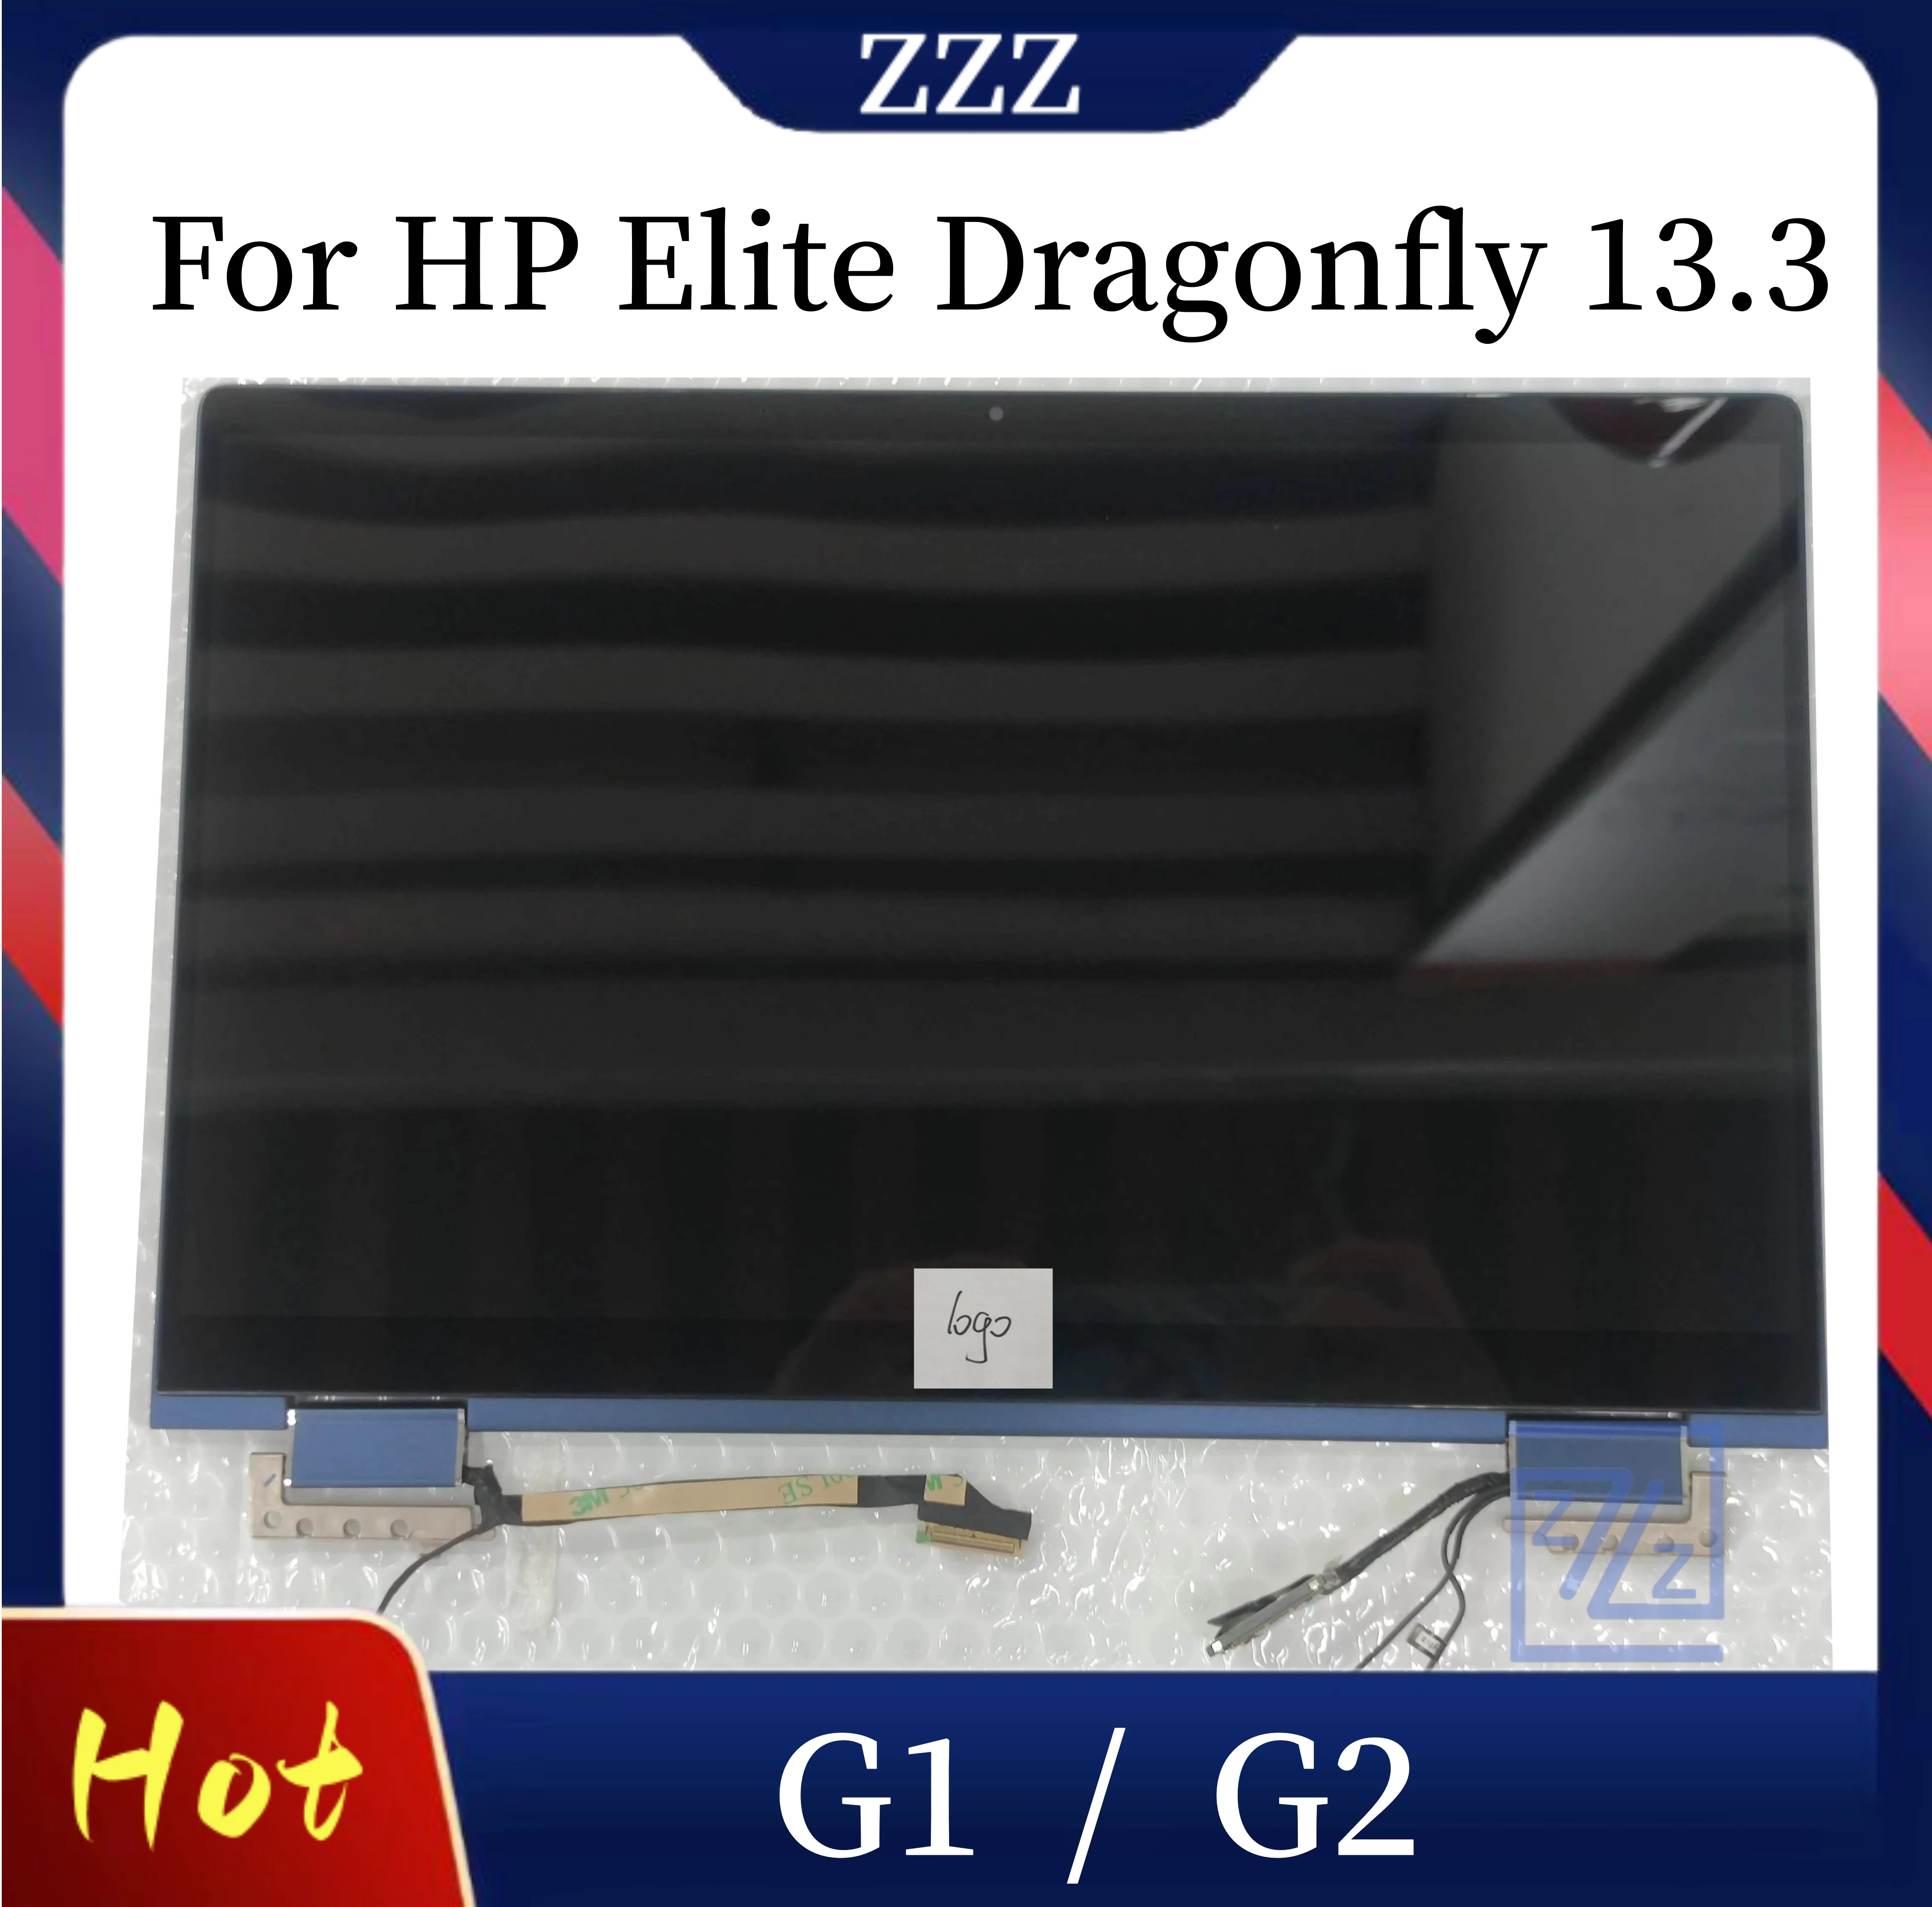 

For HP Elite Dragonfly 13.3 G1 G2 P/N L74090-001 Touch LCD Screen Assembly FHD Laptop Screen replacement